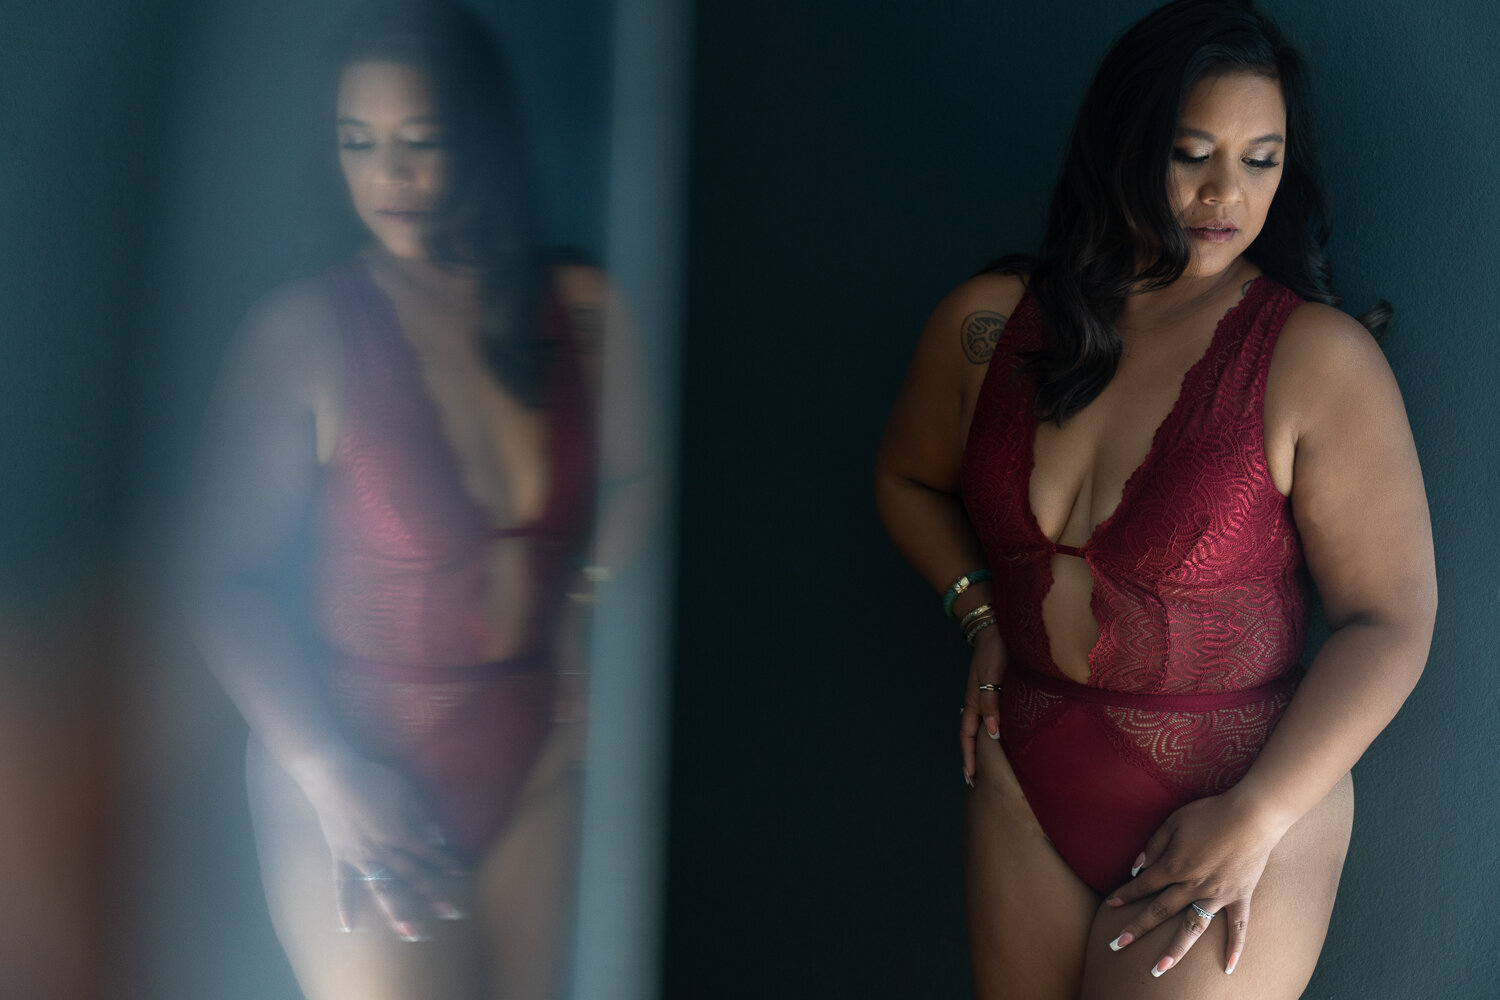 A woman stands against a dark blue backdrop, draped in a dark red lace lingerie bodysuit. Her pose is composed, with one hand resting on her hip, and the other on her thigh, her gaze thoughtfully directed towards the floor. The image captures her figure on the right side, with a mirrored reflection on the left, creating a dramatic and alluring visual symmetry.